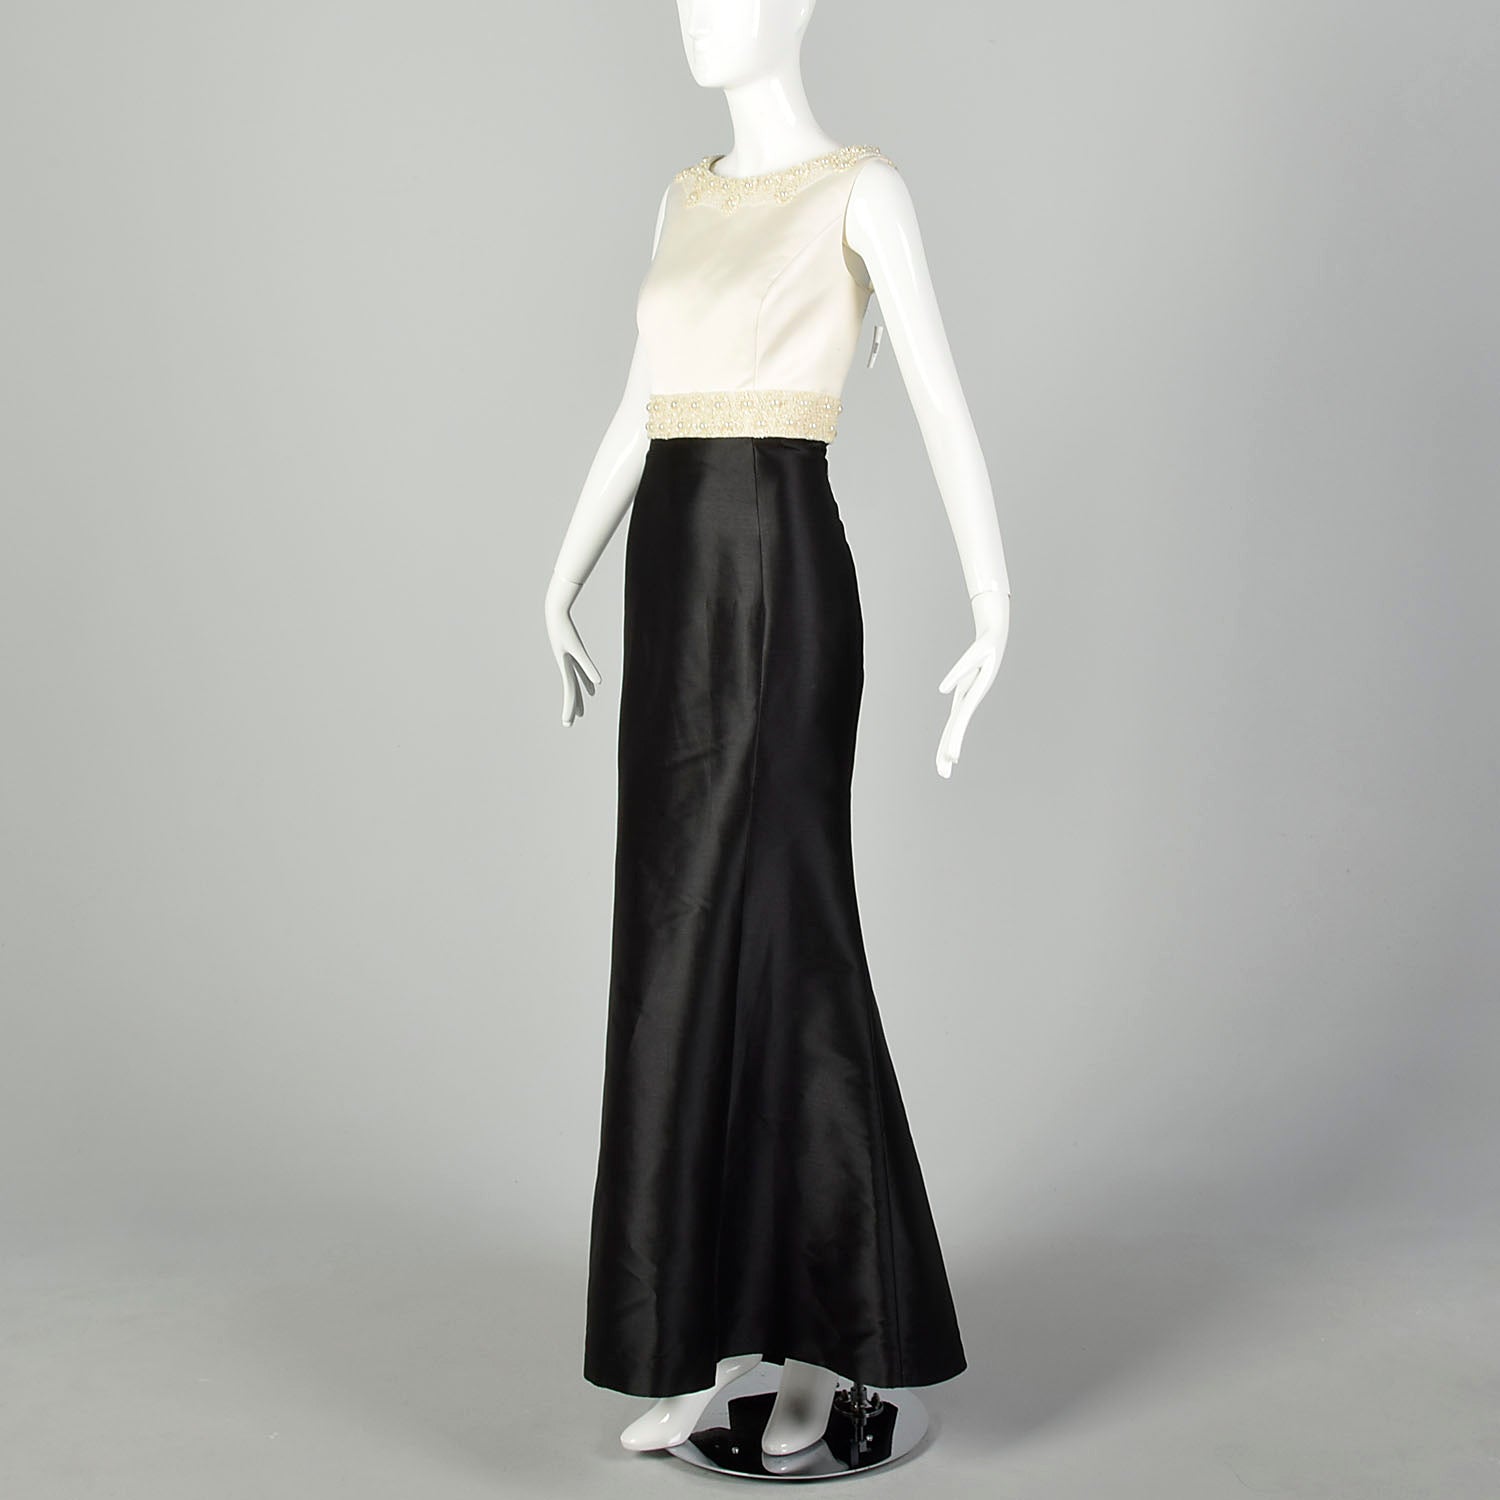 XL Two Tone Evening Dress Sleeveless Black White Formal Gown